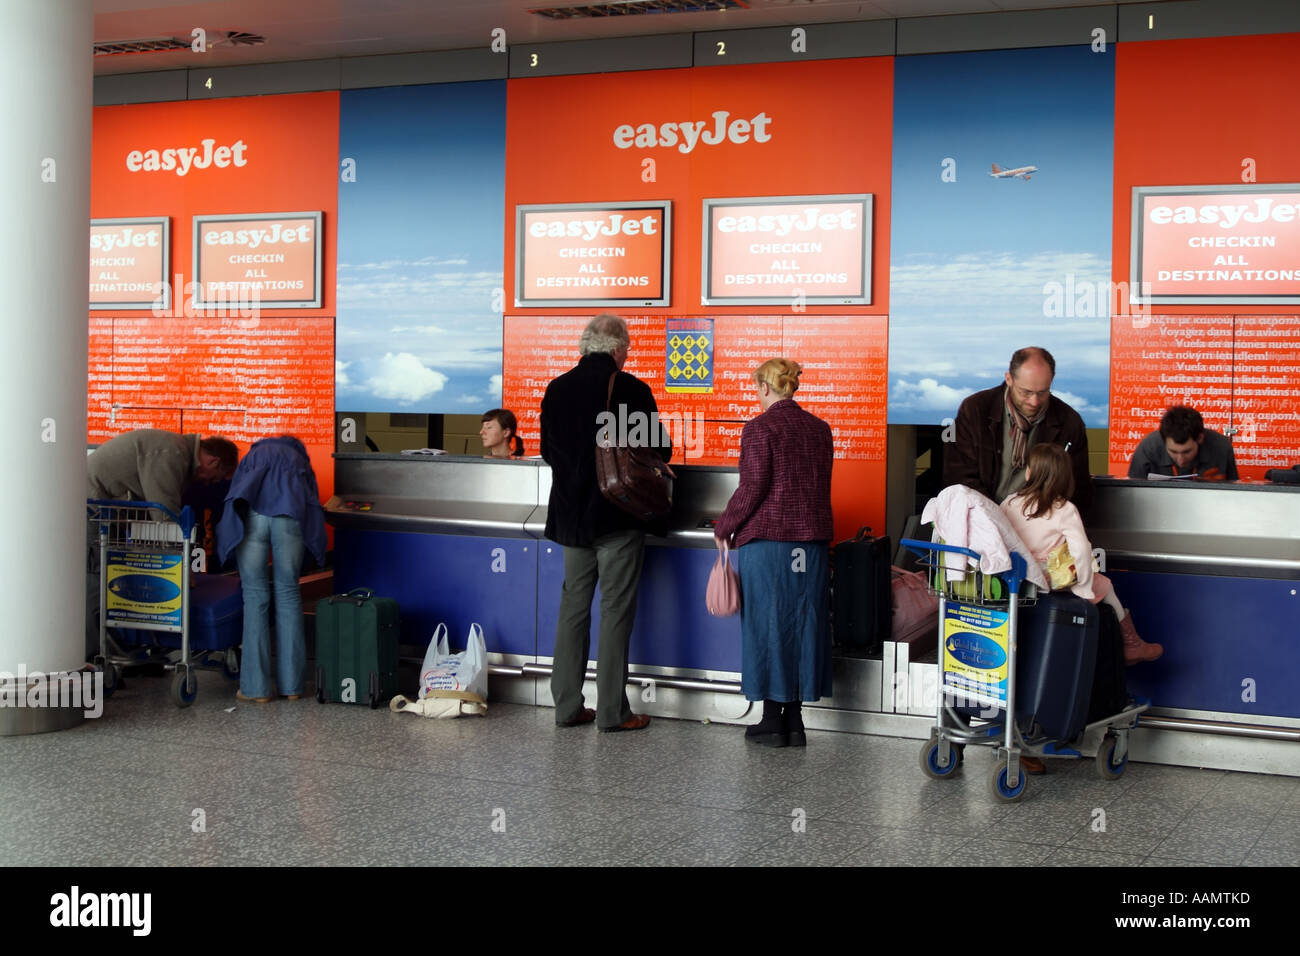 Easyjet the budget airline check in desks at Bristol International Airport Avon England United Kingdom UK passengers checking in Stock Photo